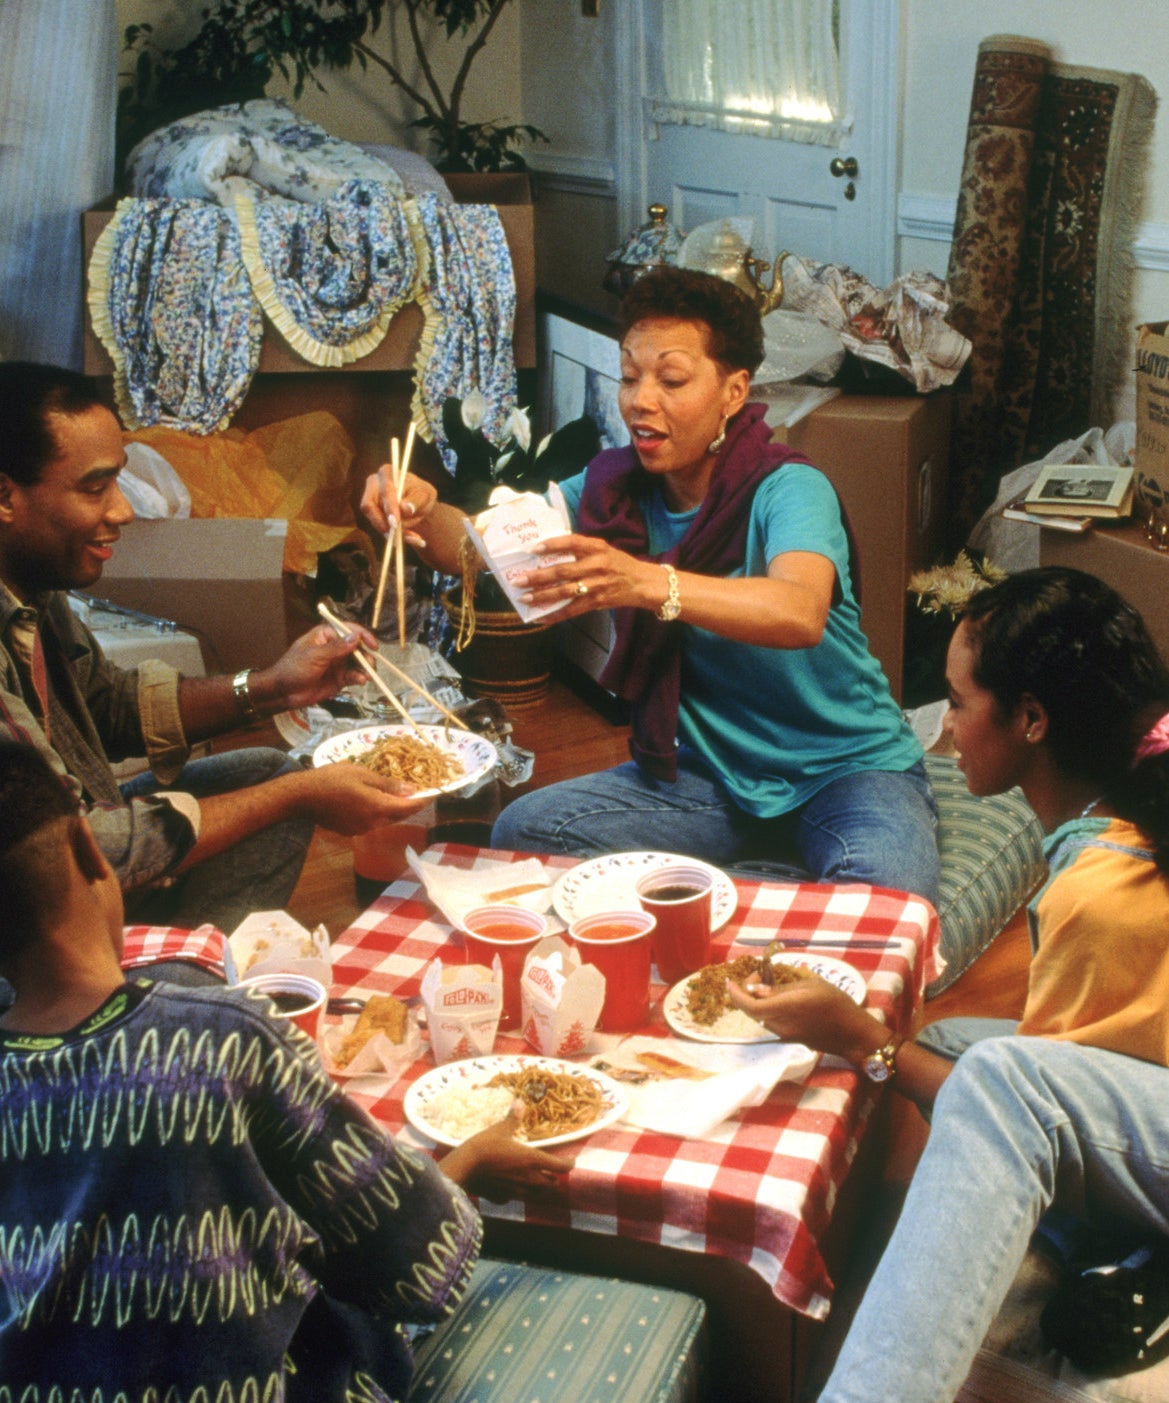 Family eats takeout dinner among open boxes in new home